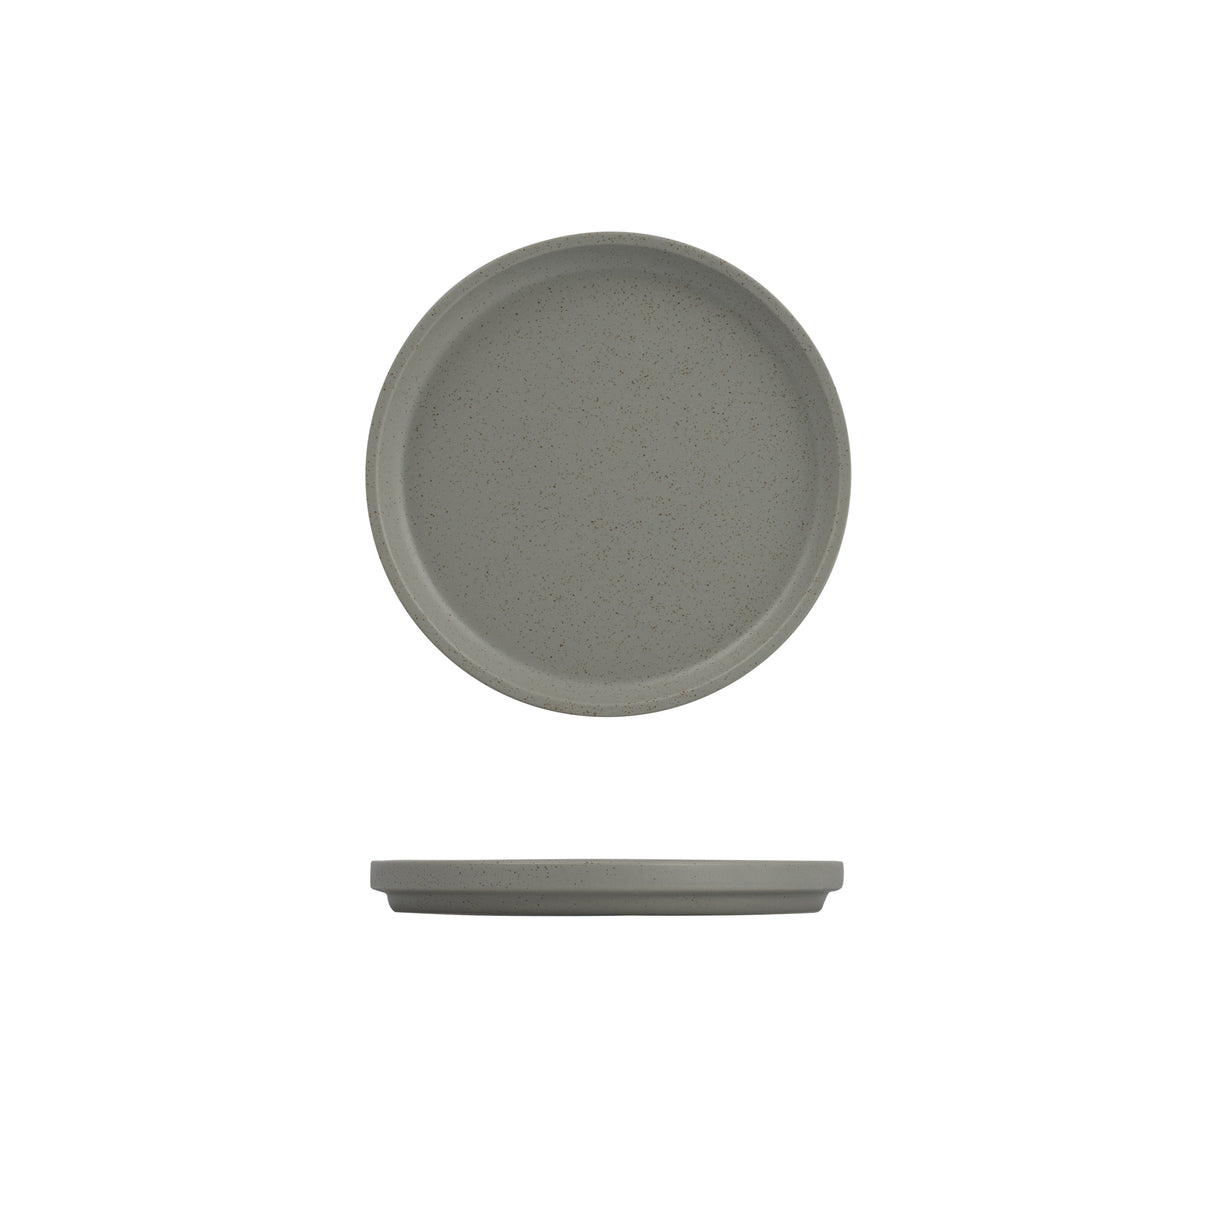 Stackable Round Plate - 200Mm, Ash from Luzerne. Stackable and sold in boxes of 6. Hospitality quality at wholesale price with The Flying Fork! 